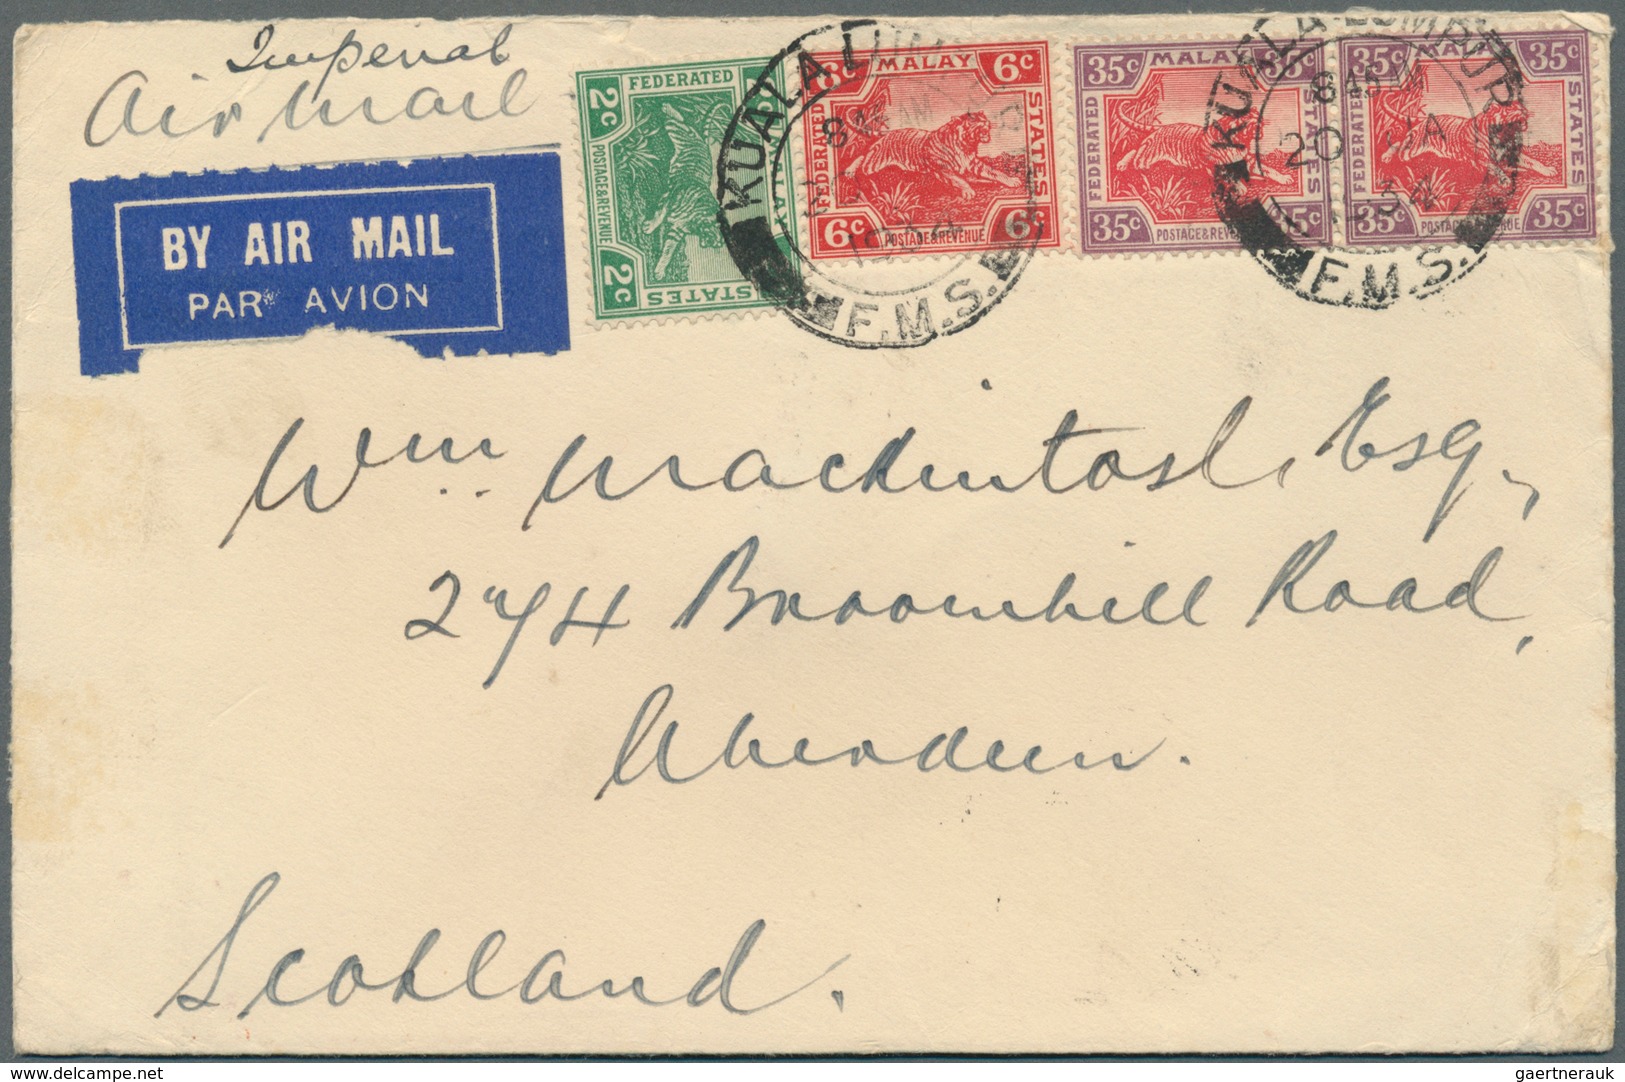 Malaiischer Staatenbund: 1934 (20.1.), Airmail Cover Endorsed 'Imperial Air Mail' Bearing Diff. Tige - Federated Malay States